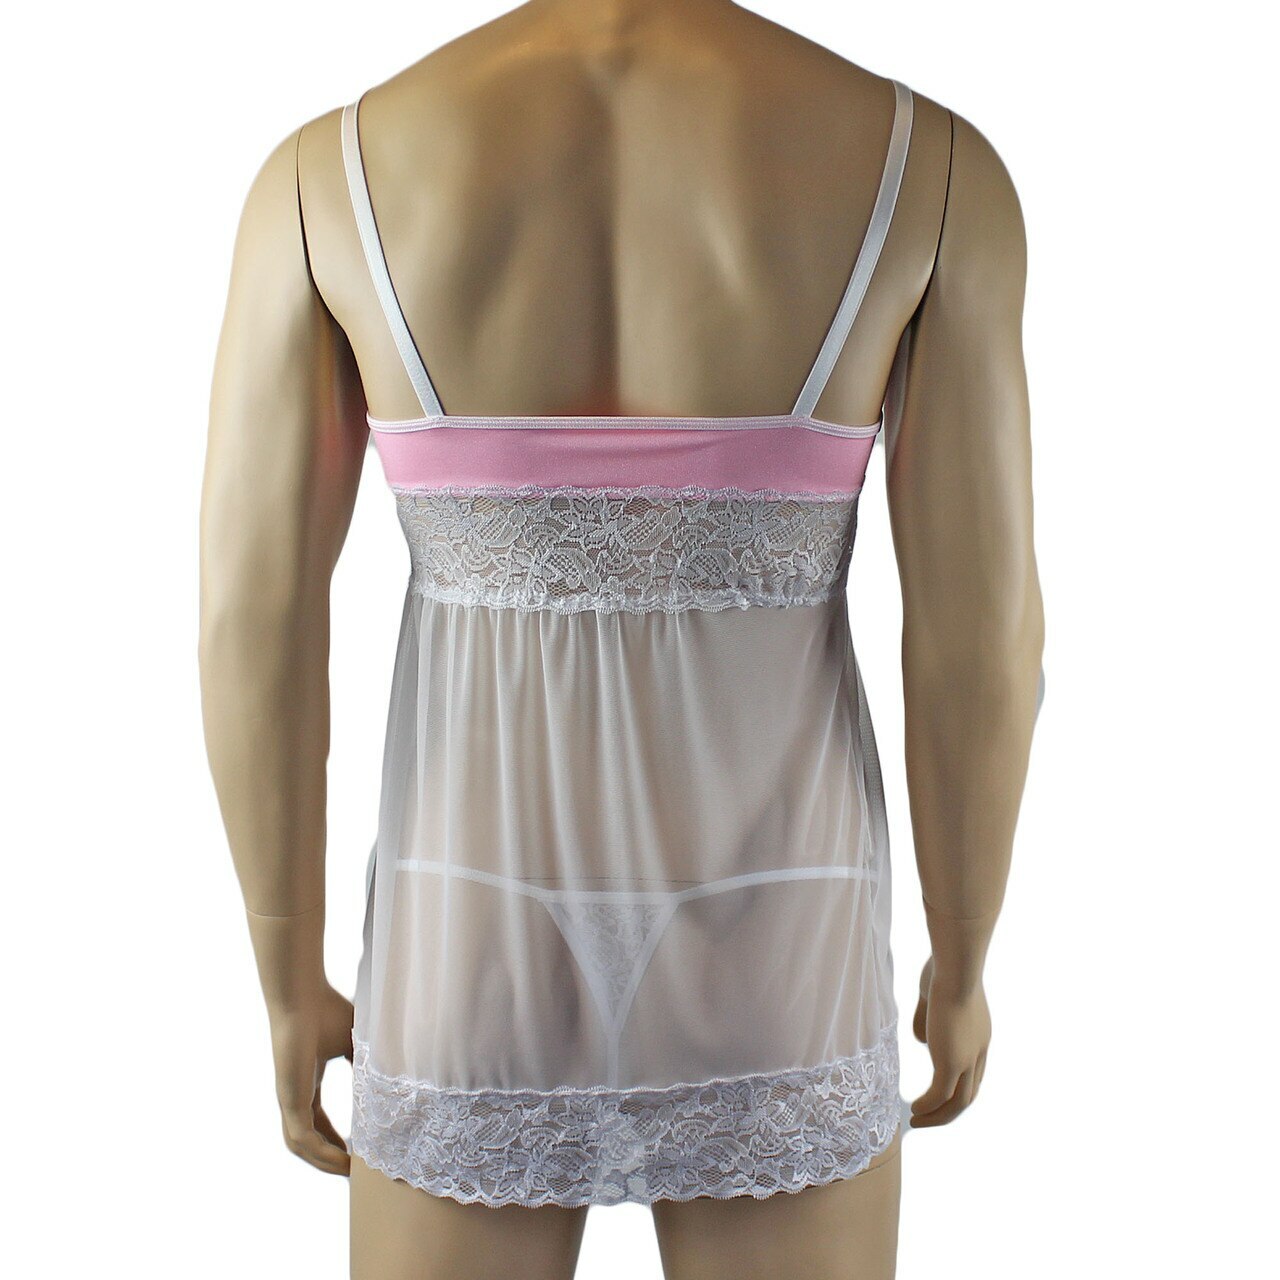 Mens Joanne Sexy Lingerie Babydoll with G string - Sizes up to 3XL (light pink & white plus other colours)